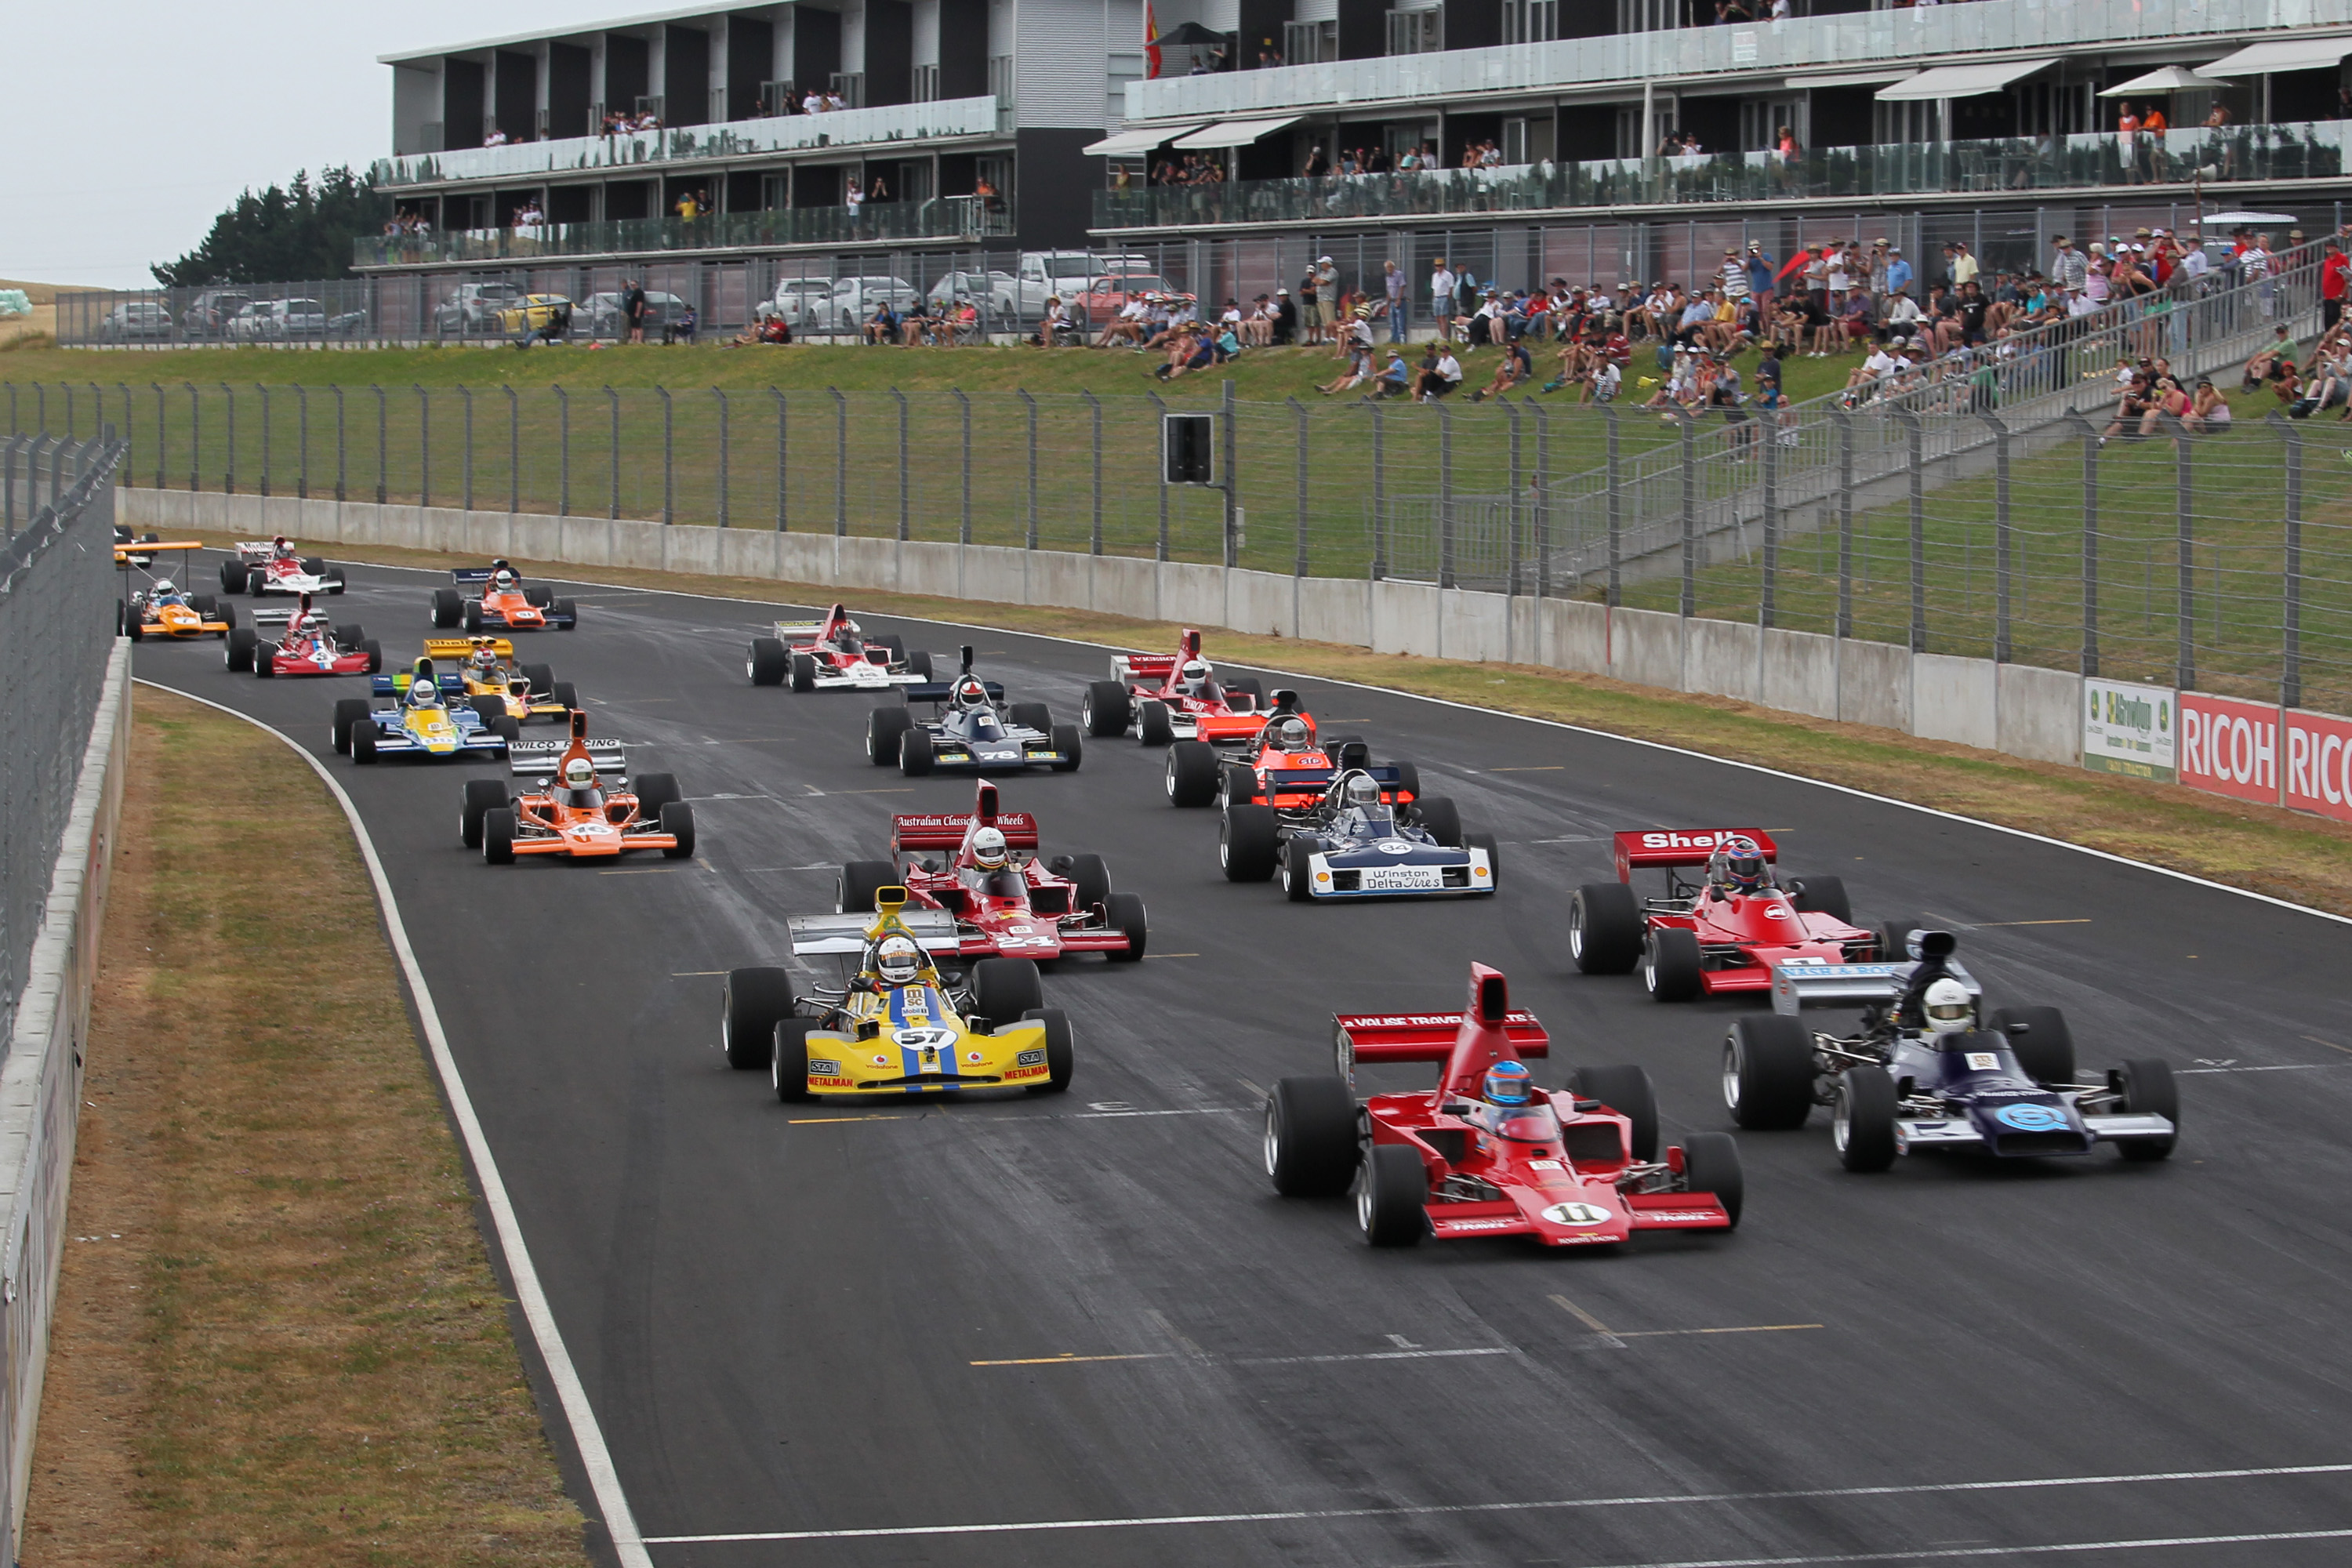 F5000: Storming start for Smith at Hampton Downs